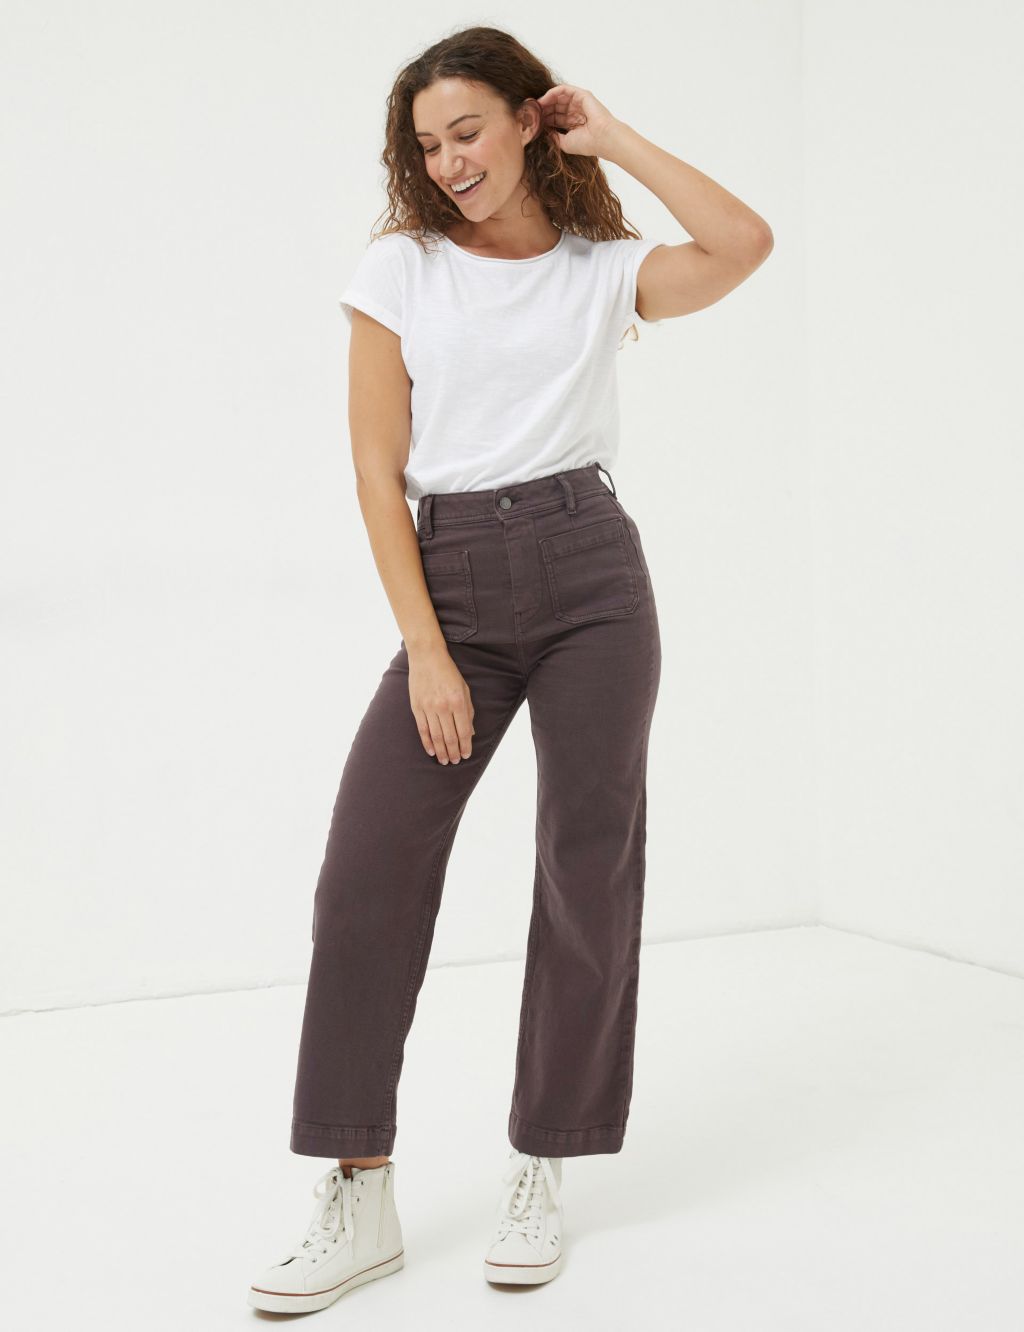 Women Solid Plum Mid Rise Cropped Jeggings